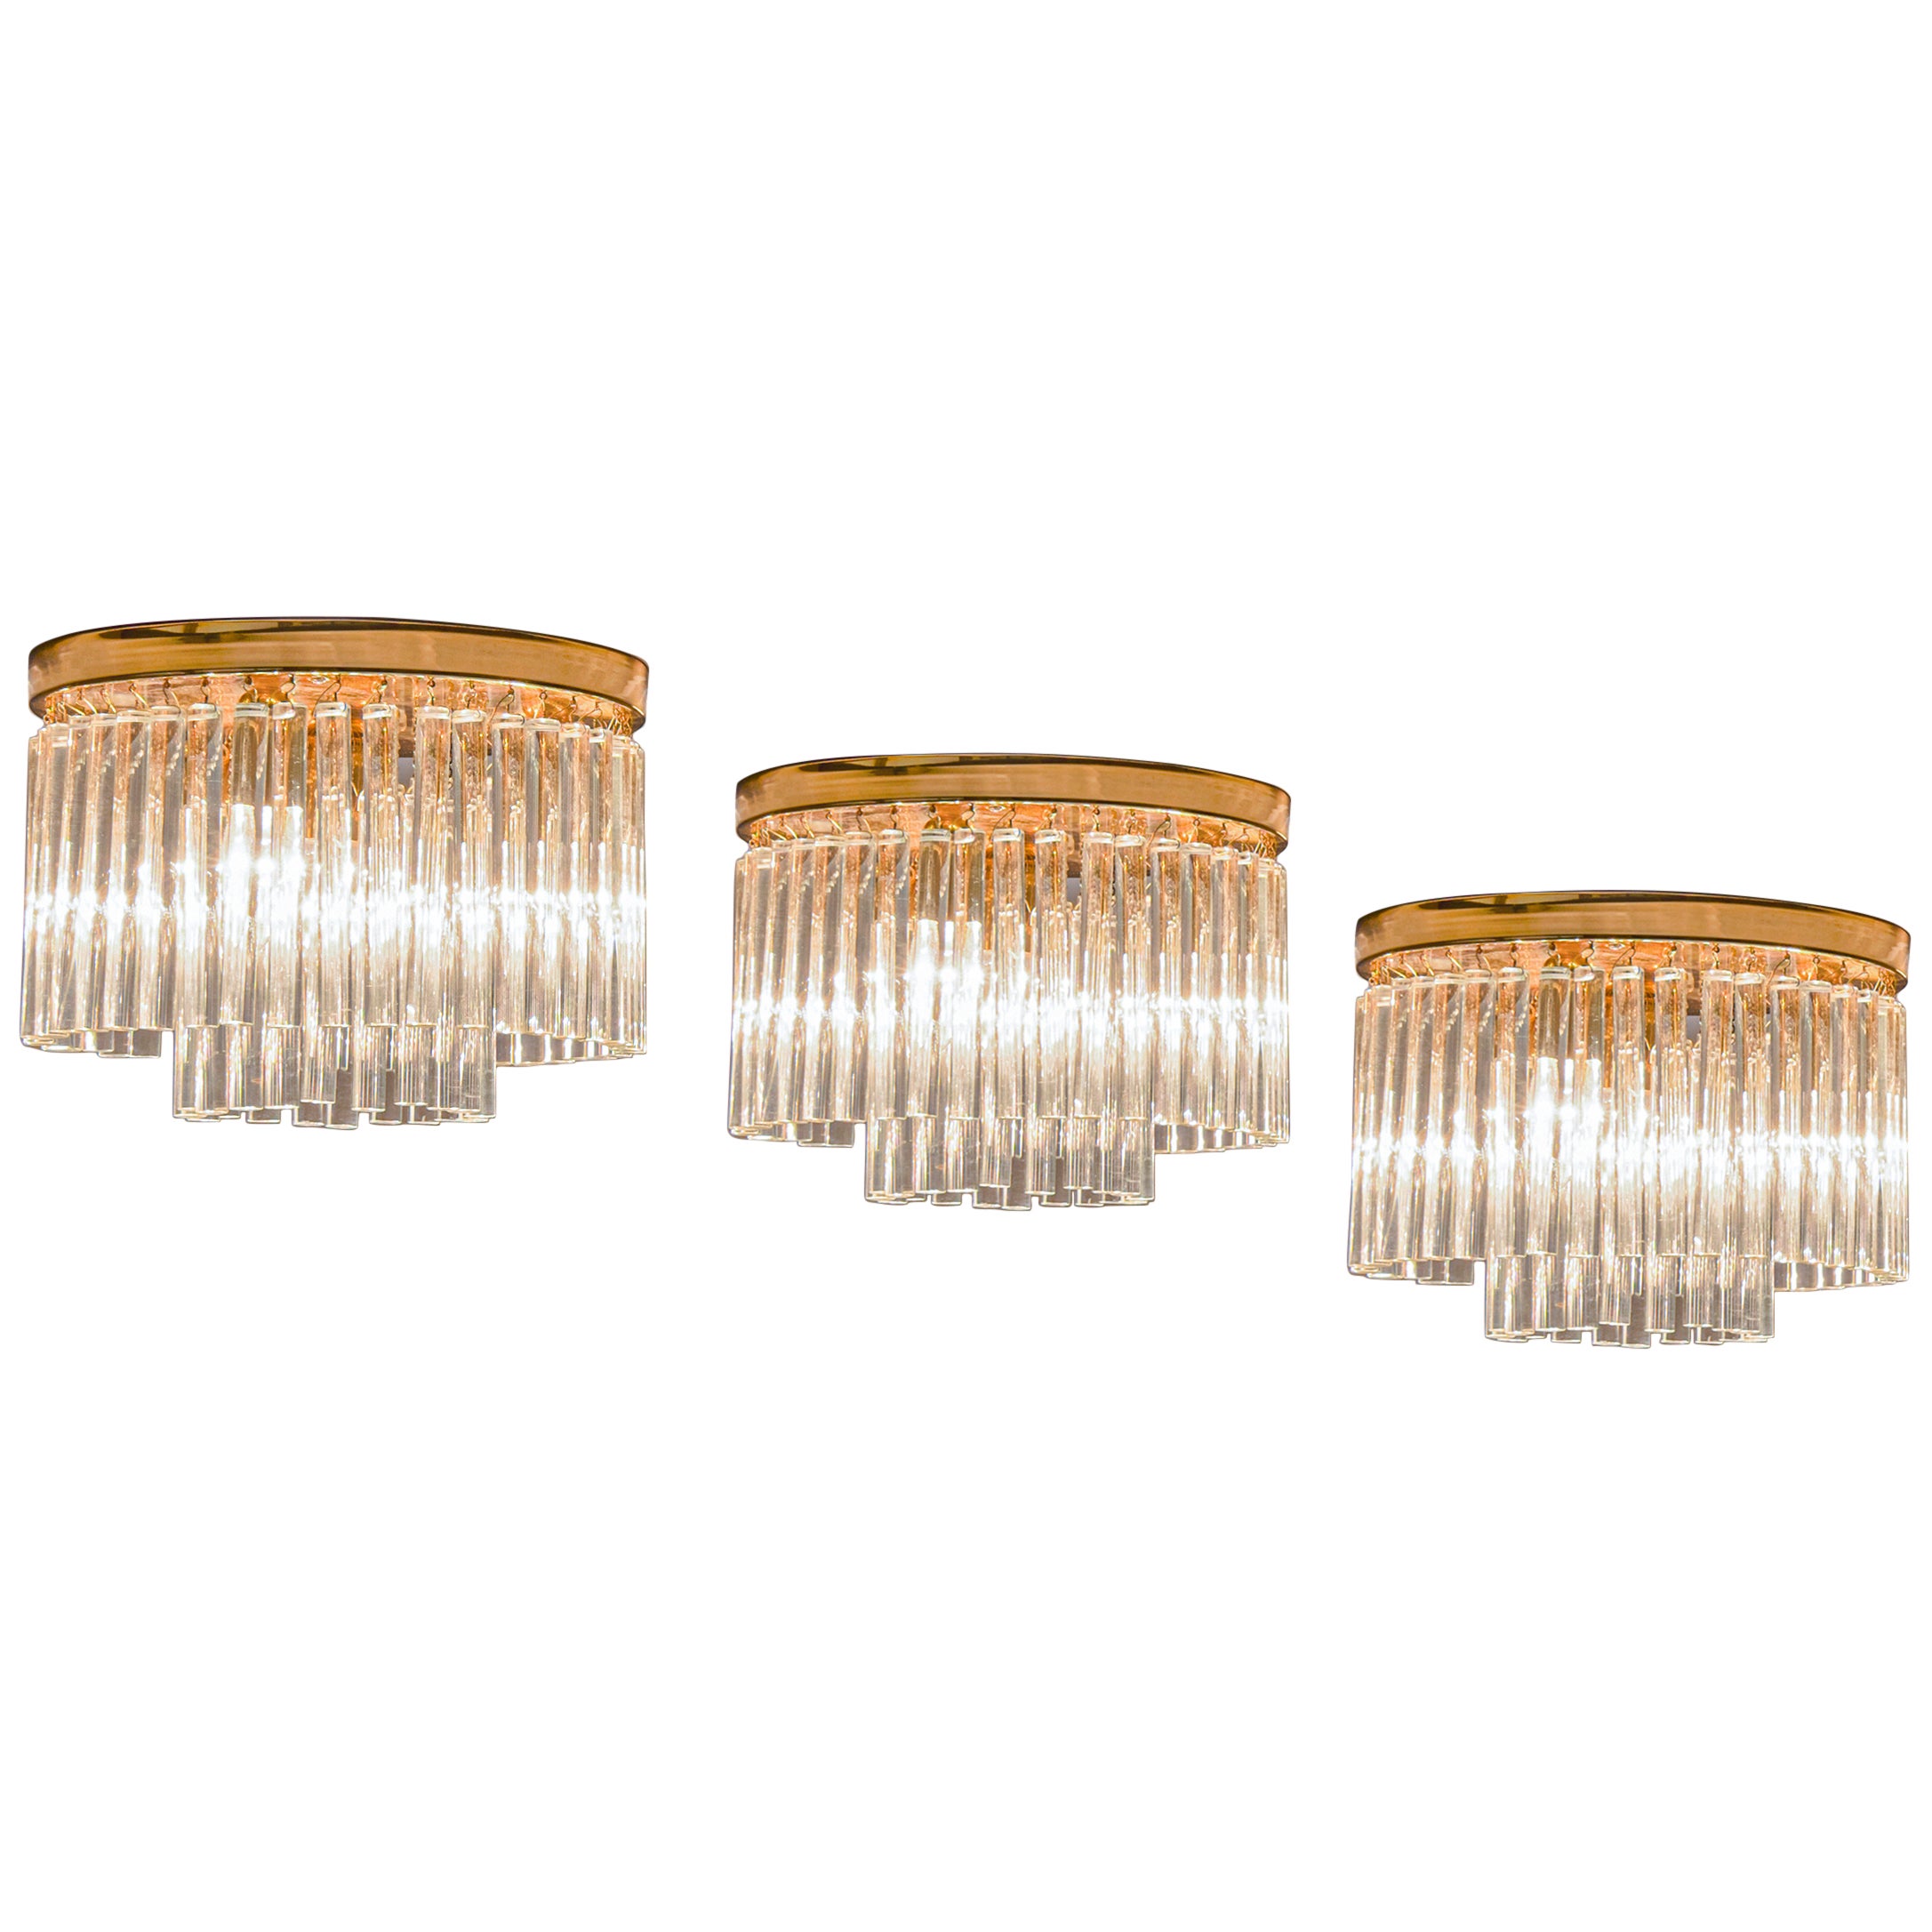 Italian Ceiling Lights in Brass and Glass